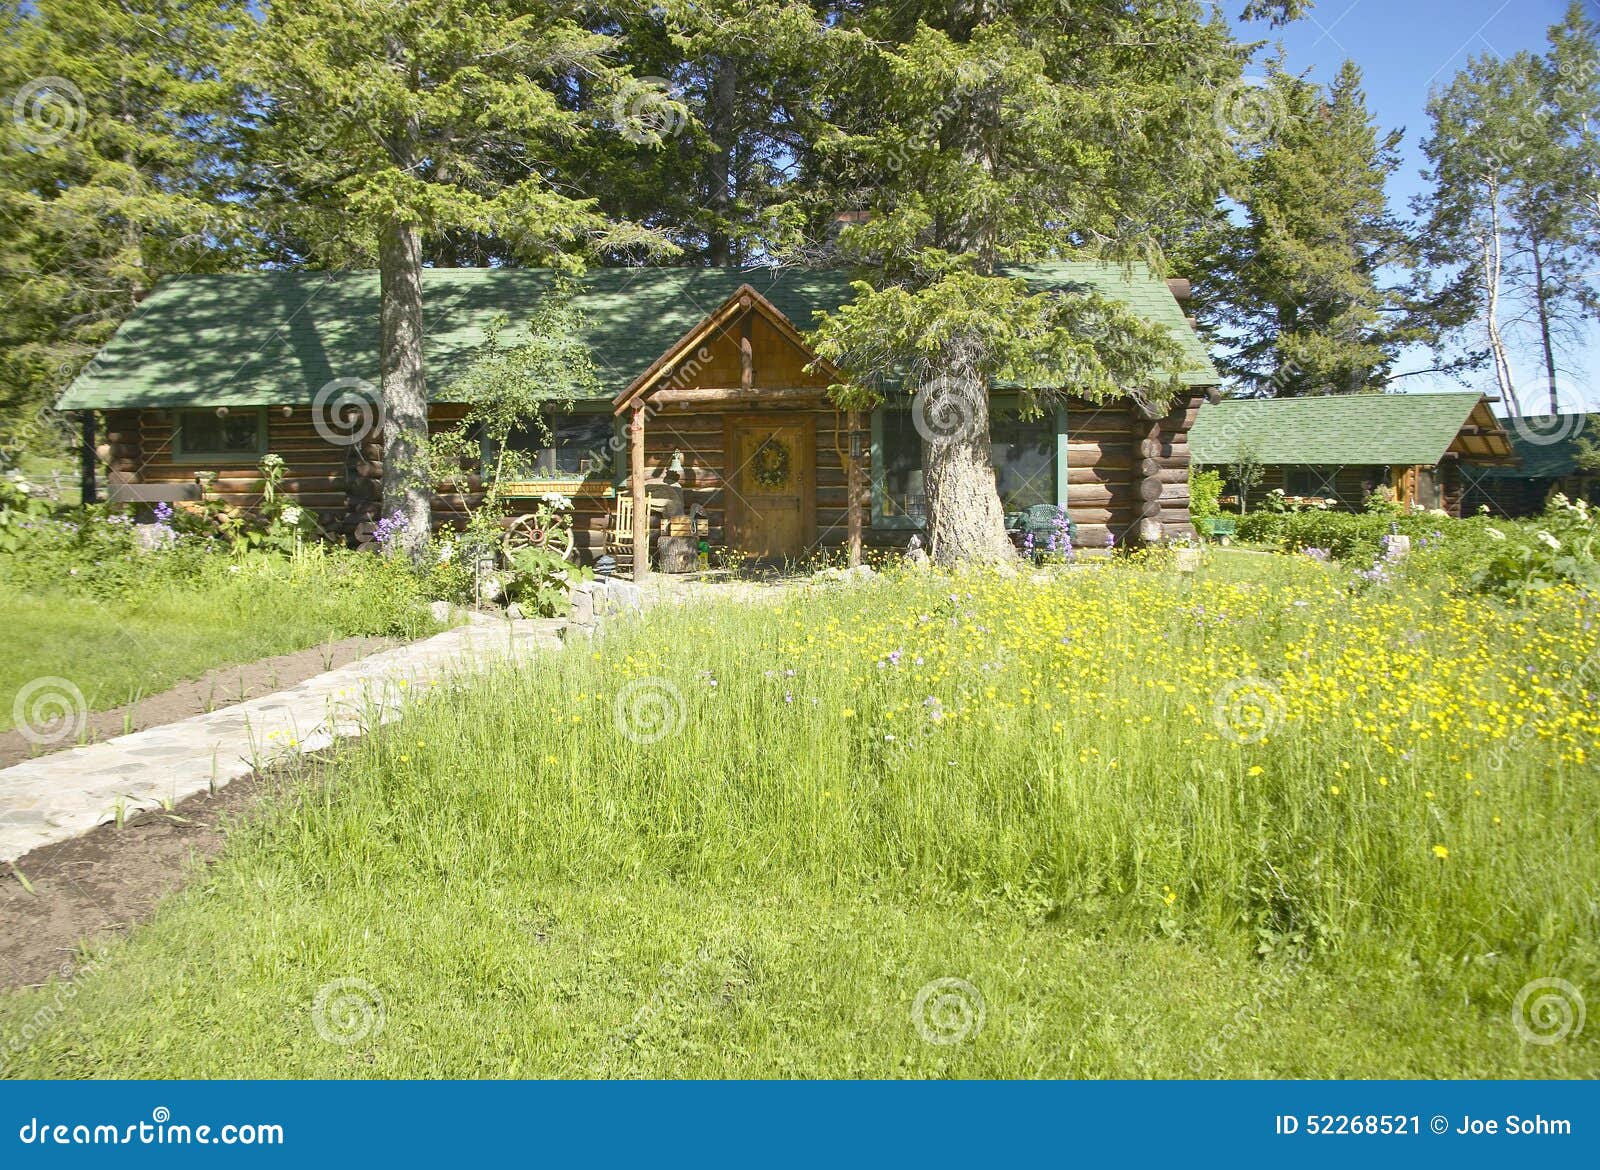 lodge of taft ranch in centennial valley, lakeview, mt